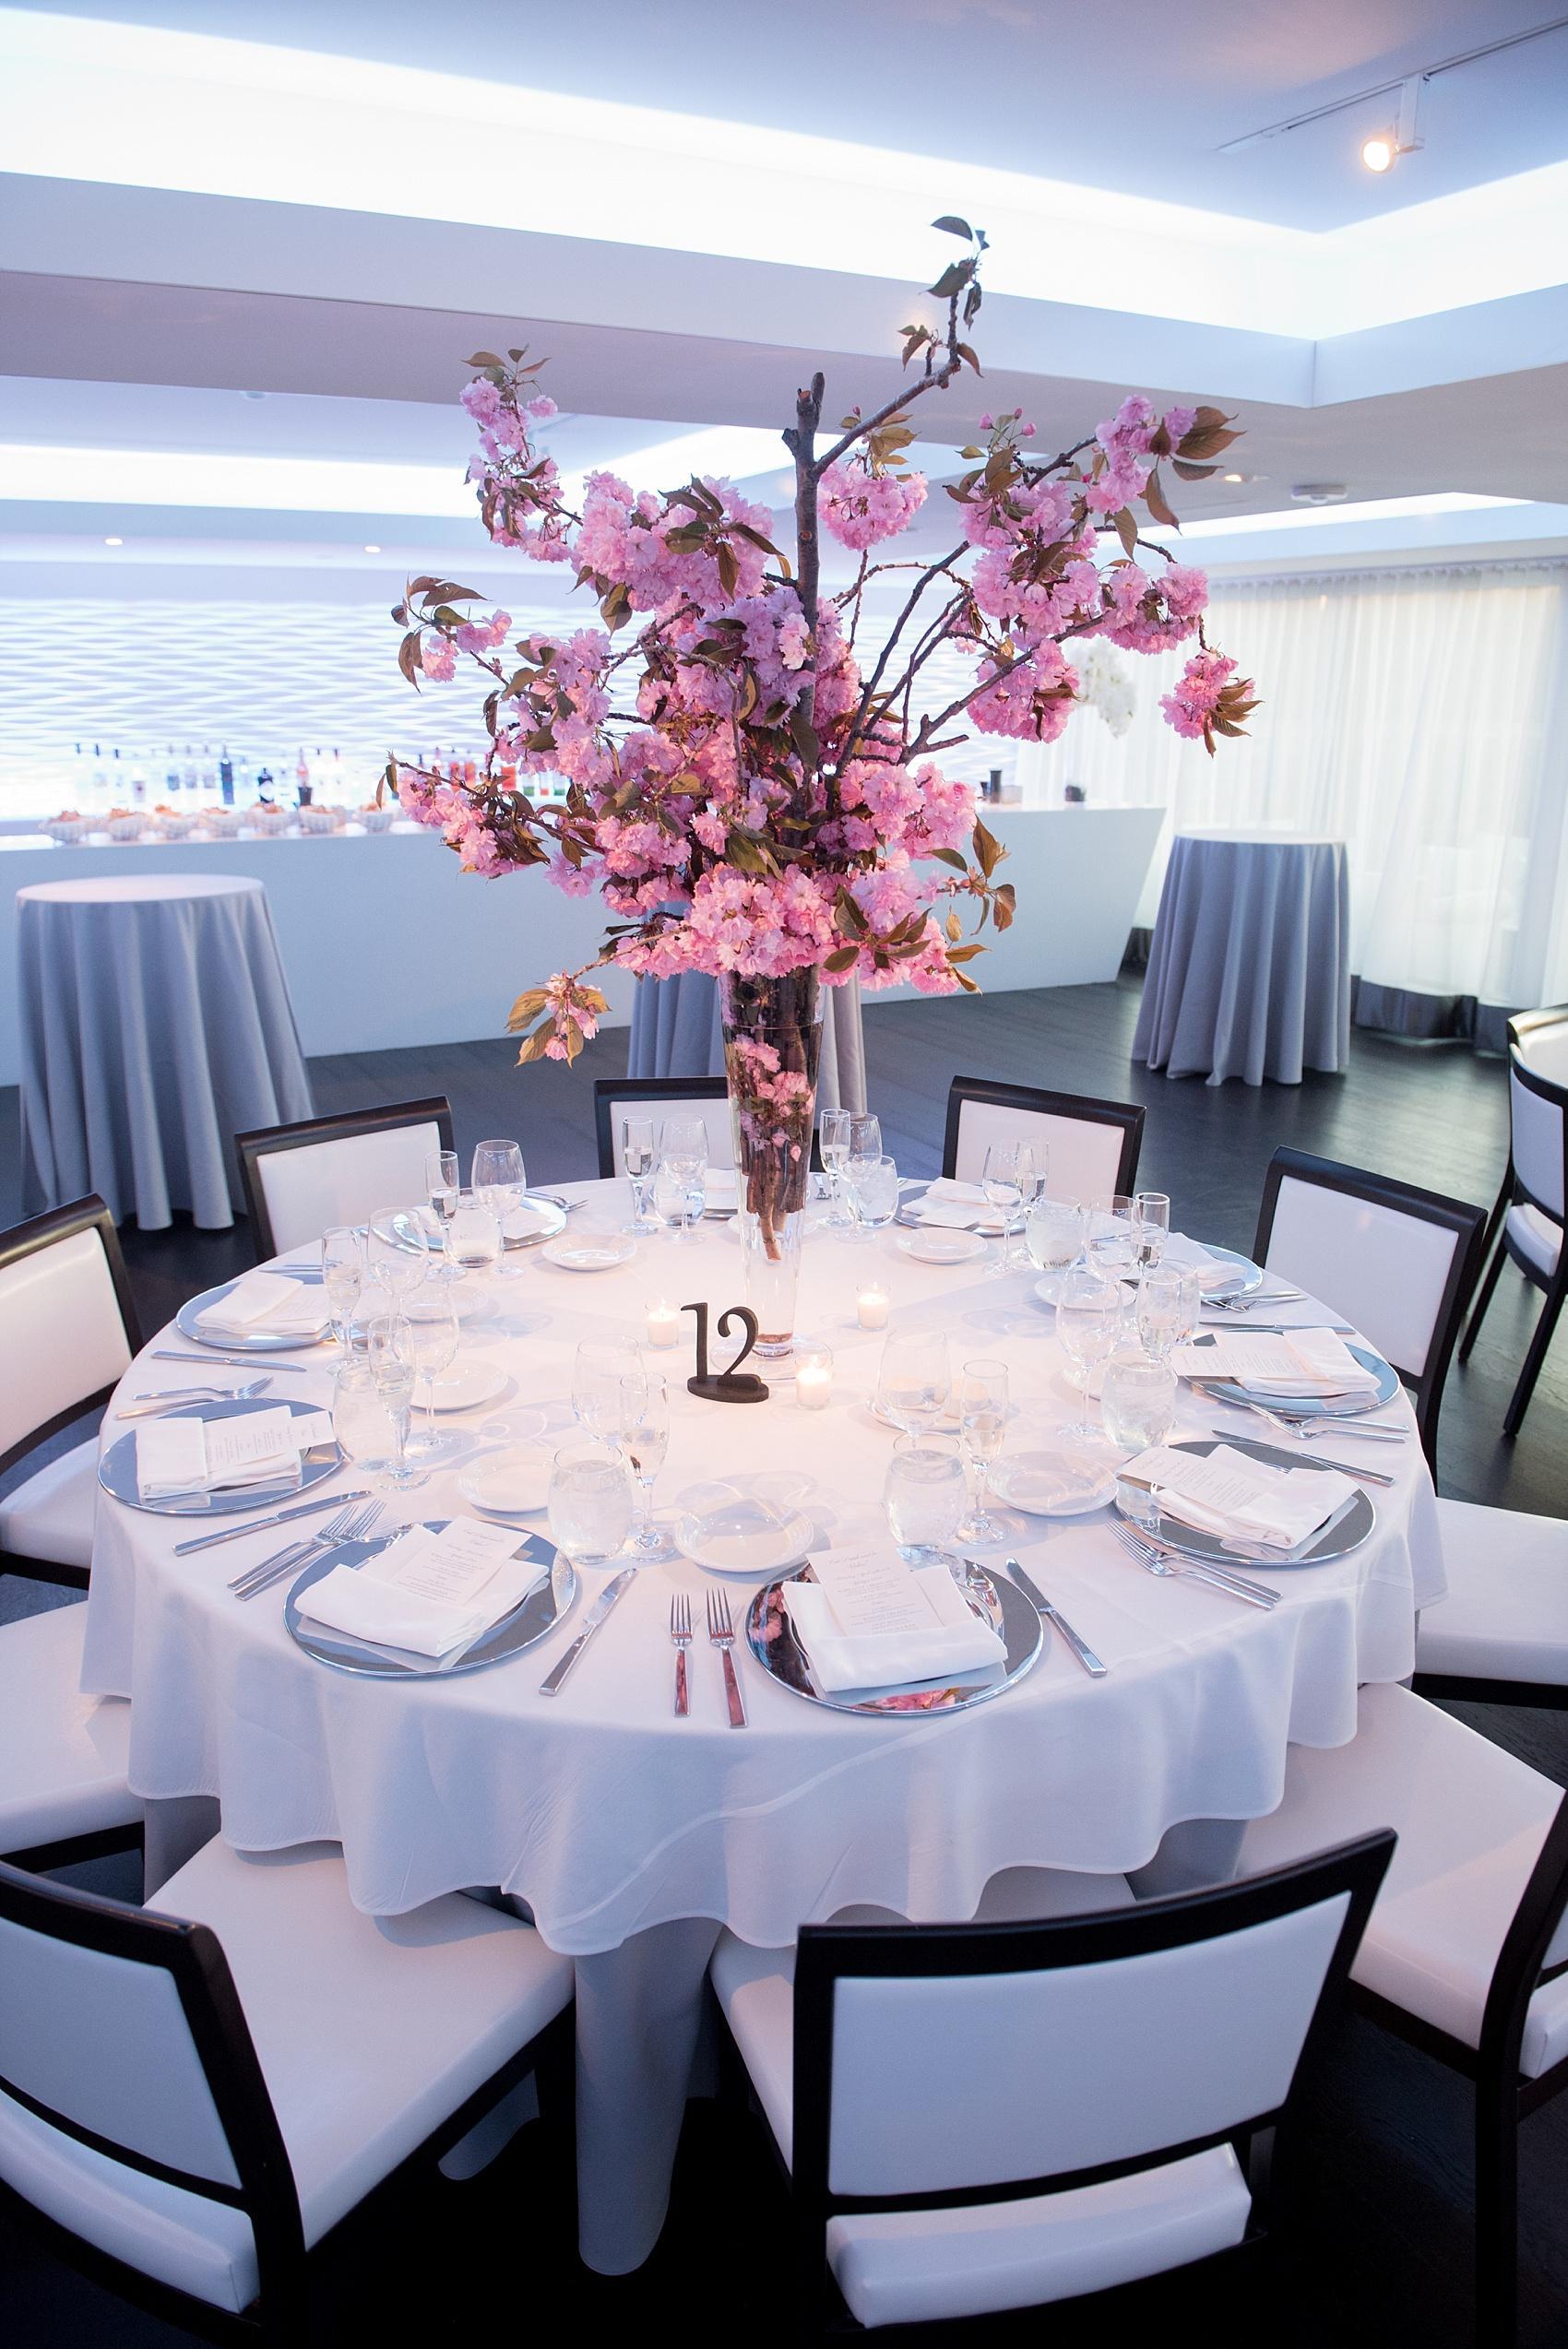 Photos by Mikkel Paige Photography for a wedding at Harbor Club on Long Island. Modern sleek reception tables decorated with cherry blossoms centerpieces.